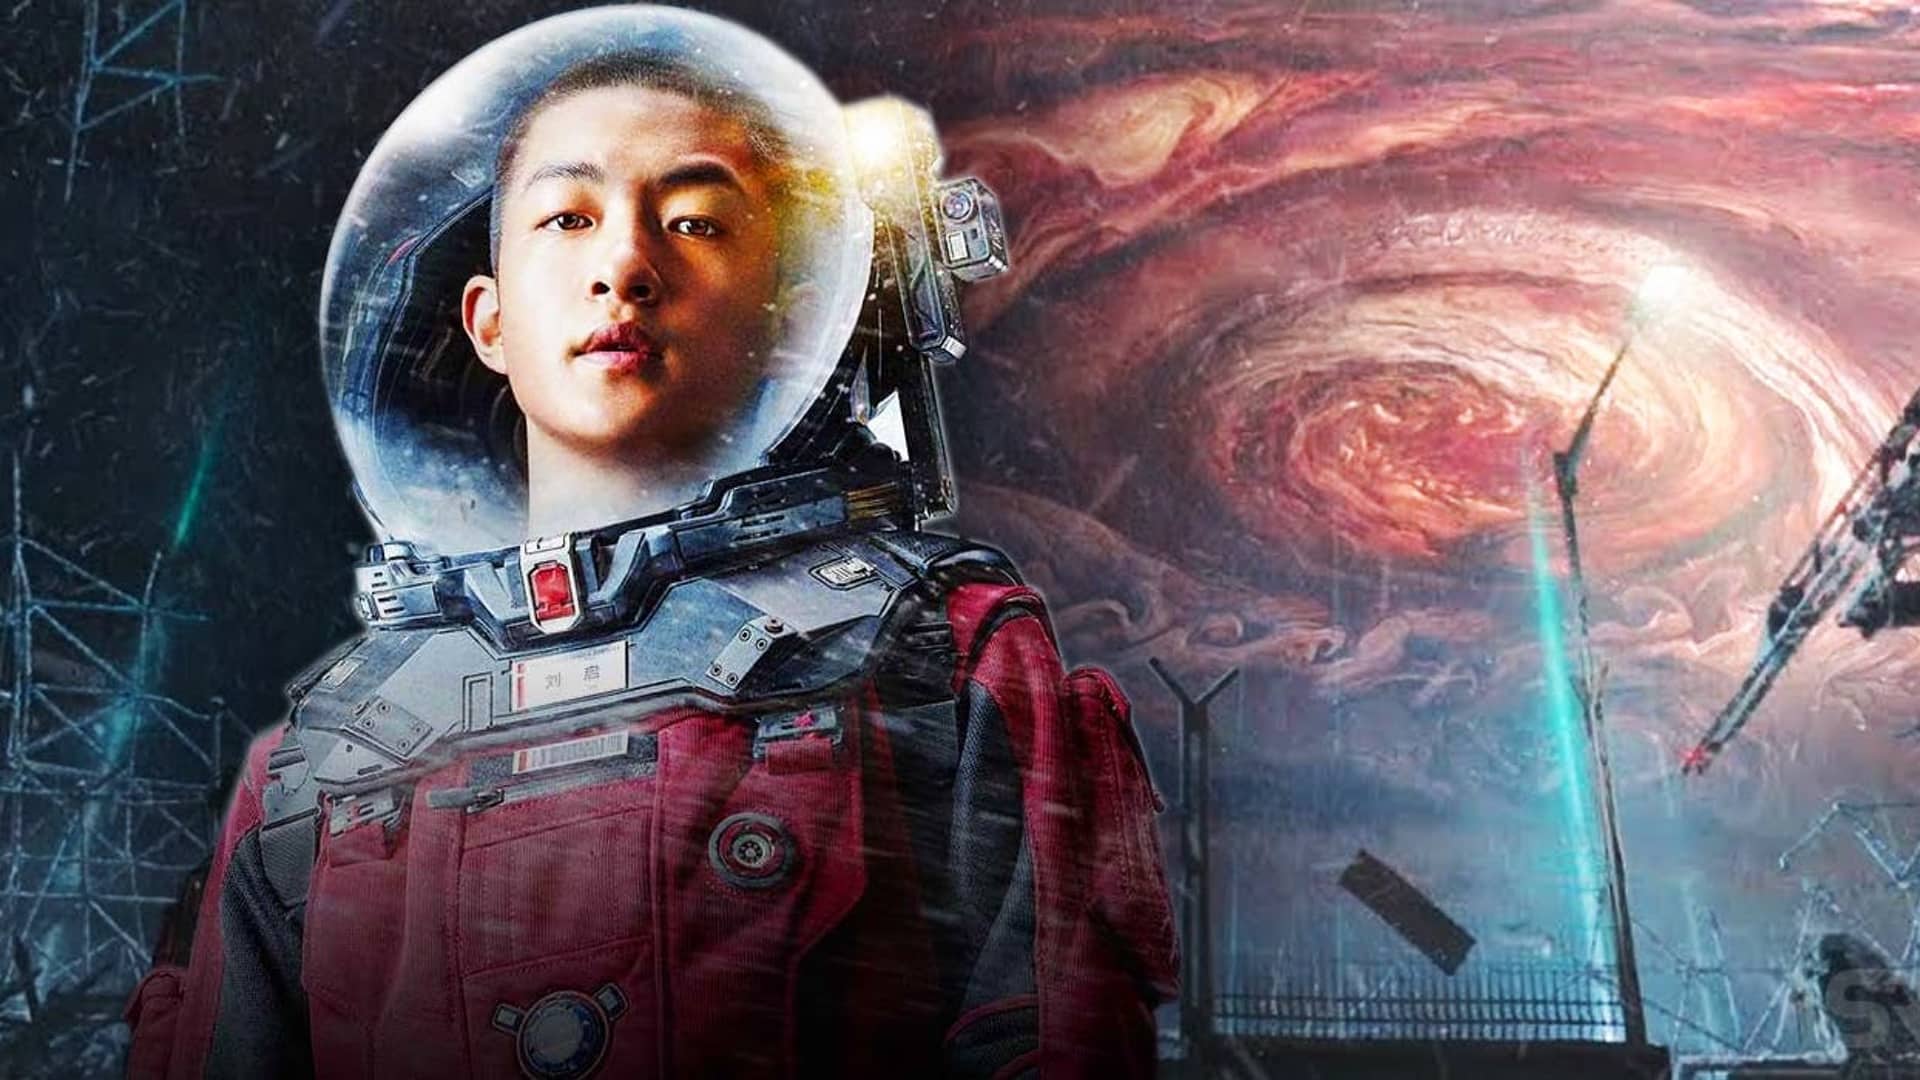 The Wandering Earth Review Foretaste Of The Exciting Future. Fortress of Solitude